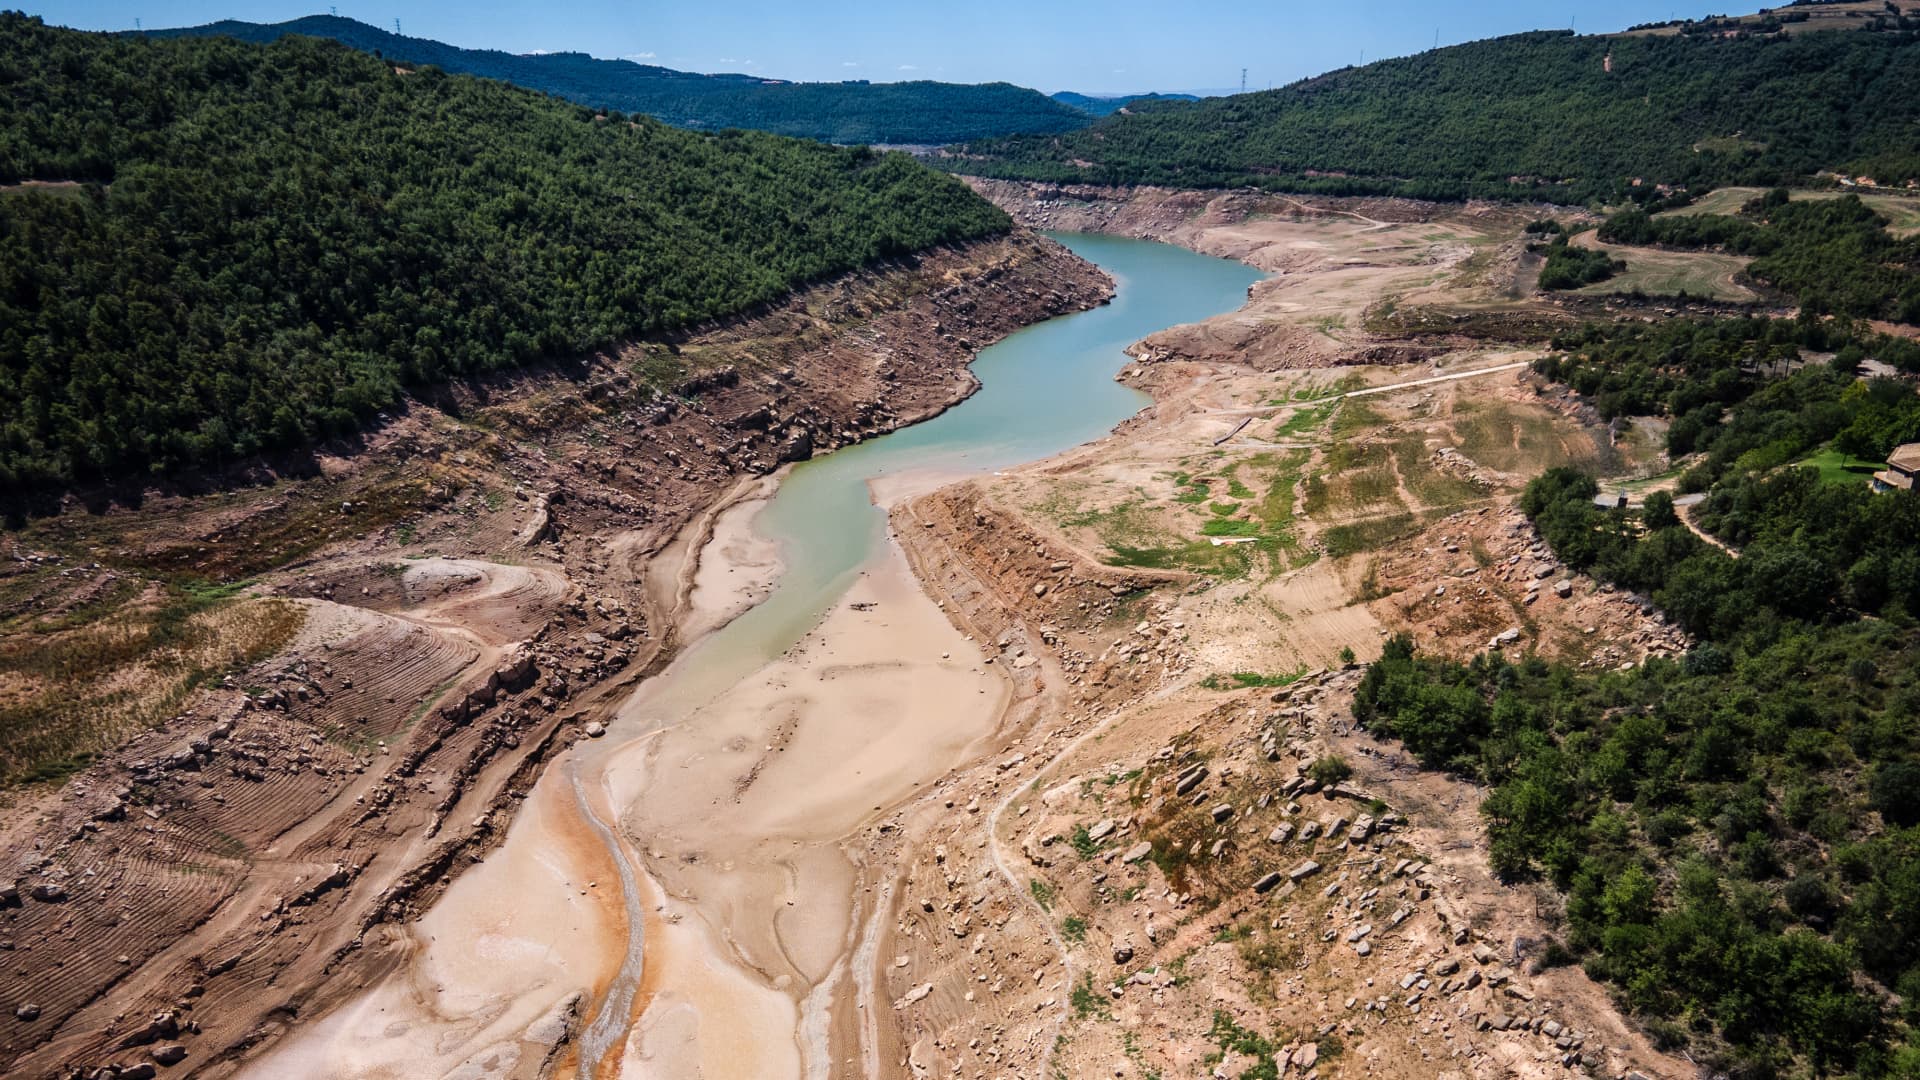 Europe is experiencing its worst drought in at least 500 years